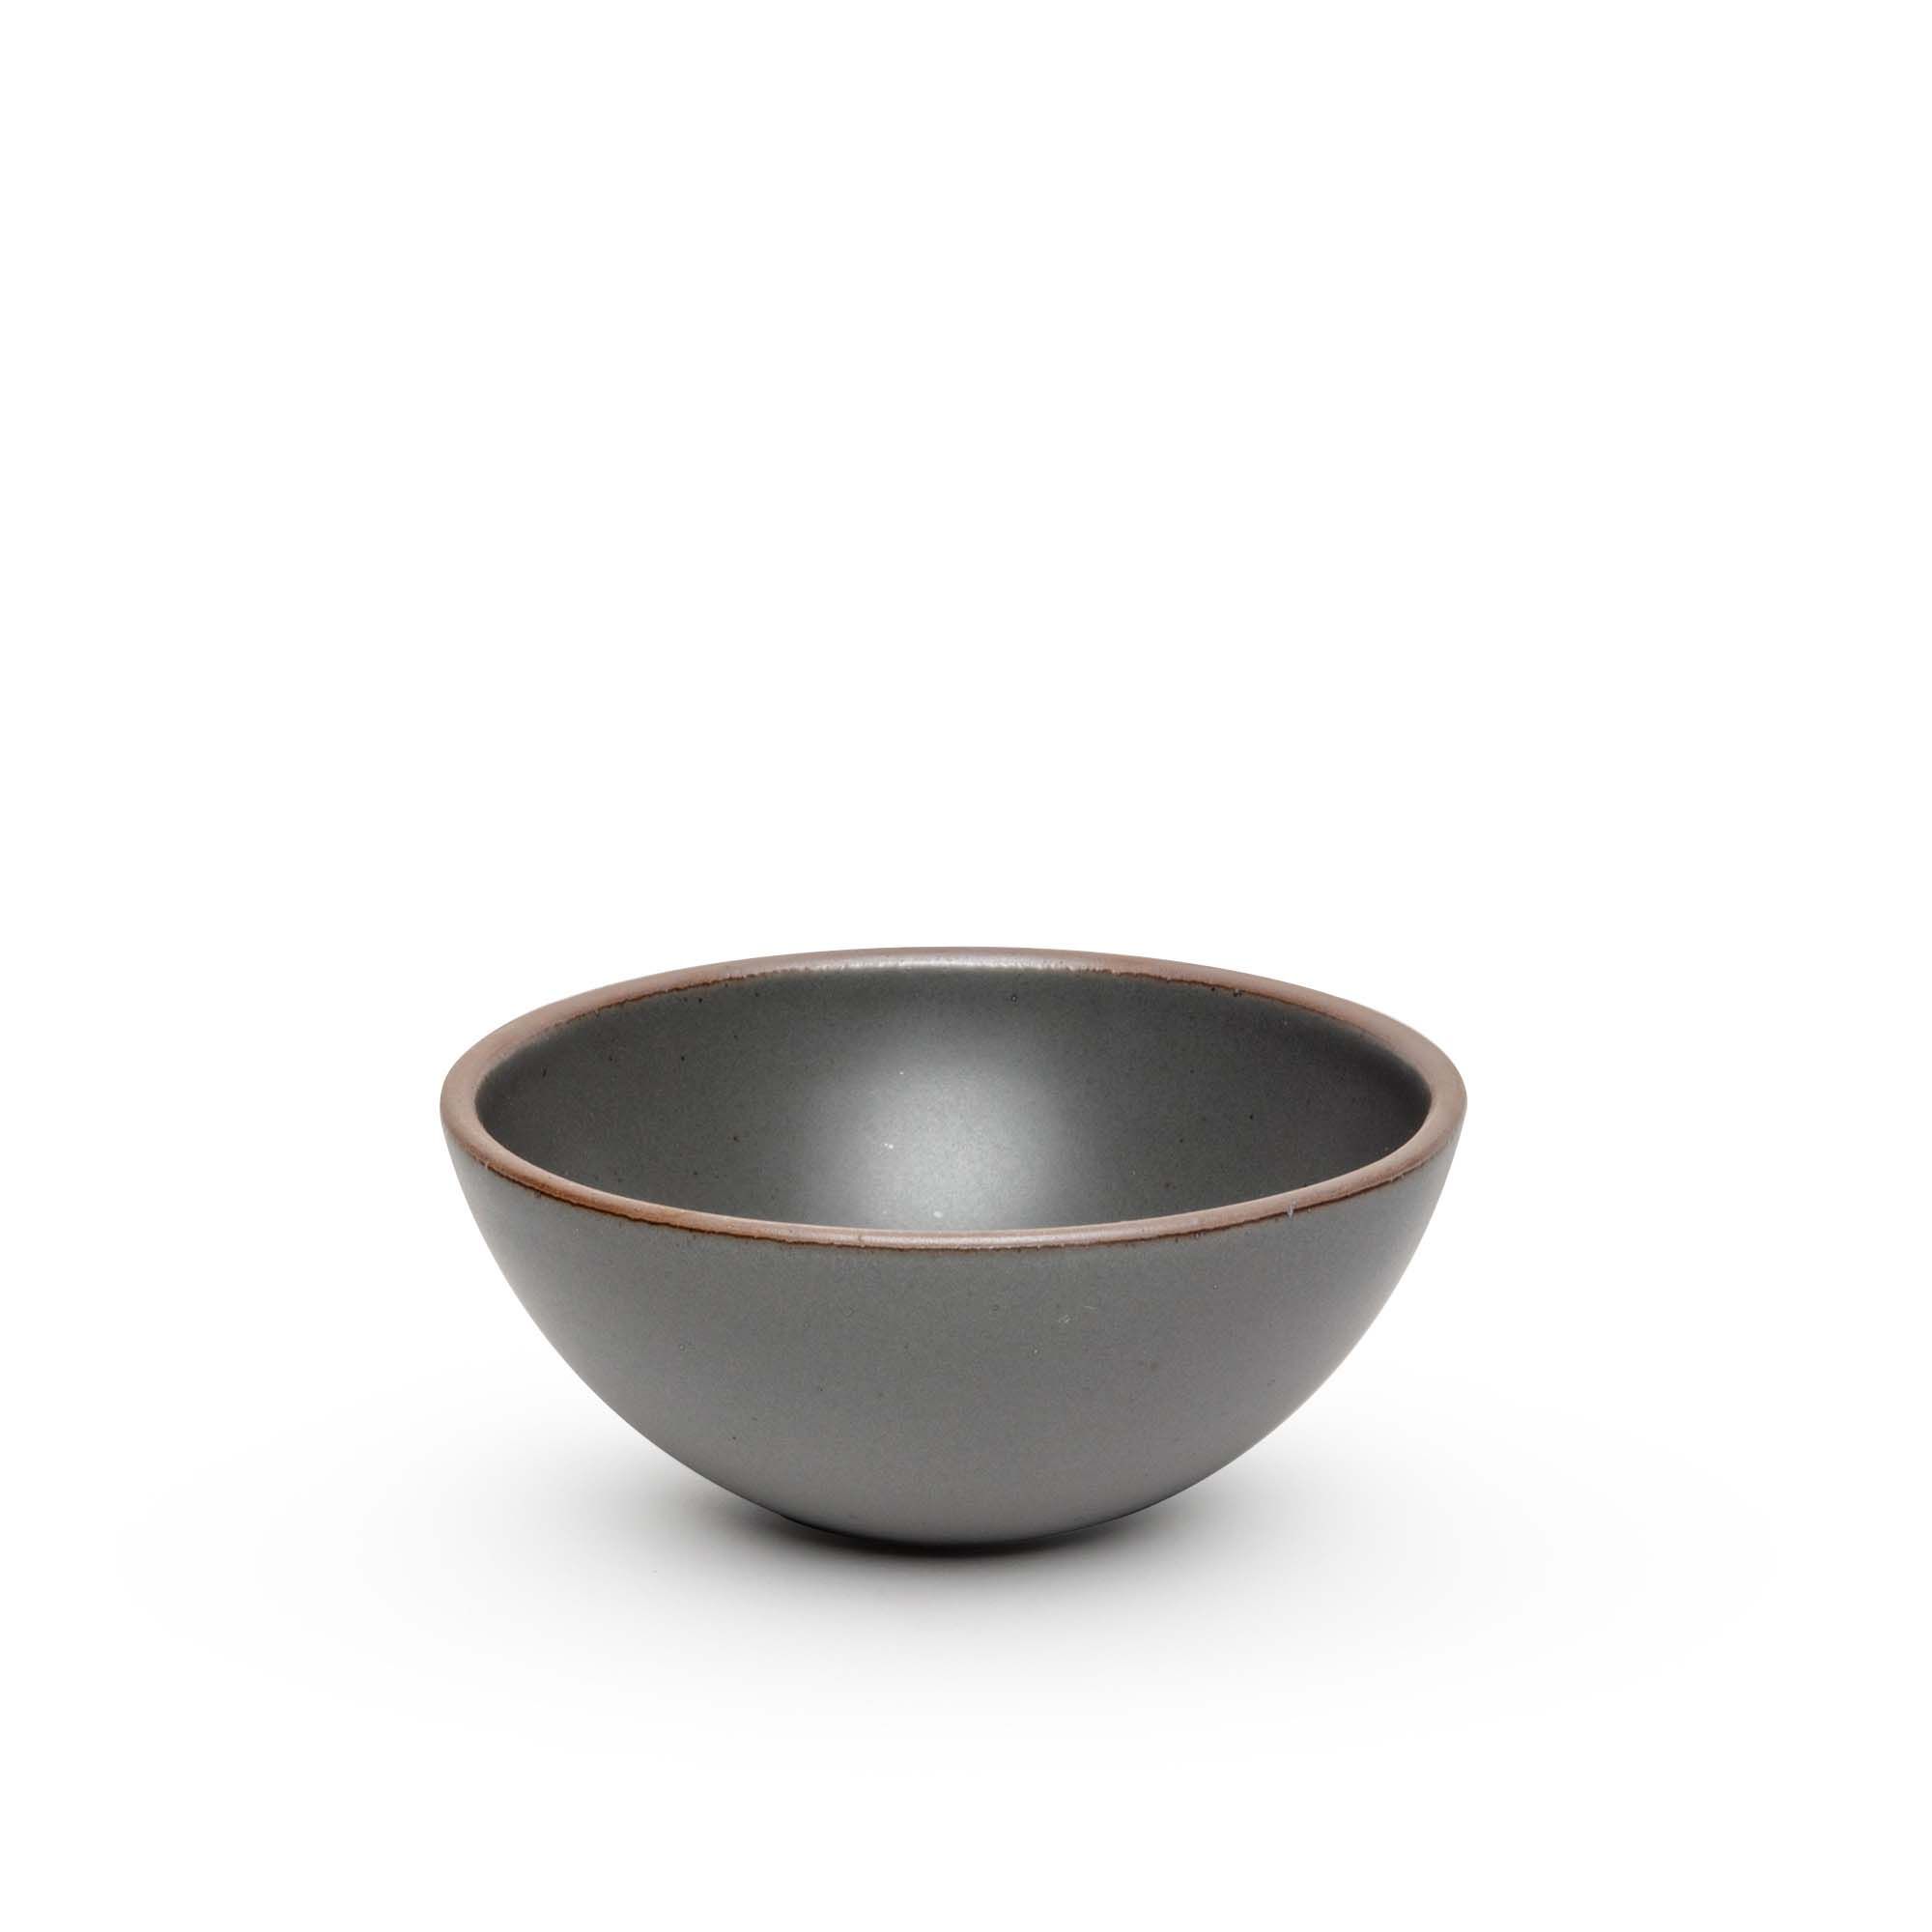 A medium rounded ceramic bowl in a cool, medium grey color featuring iron speckles and an unglazed rim